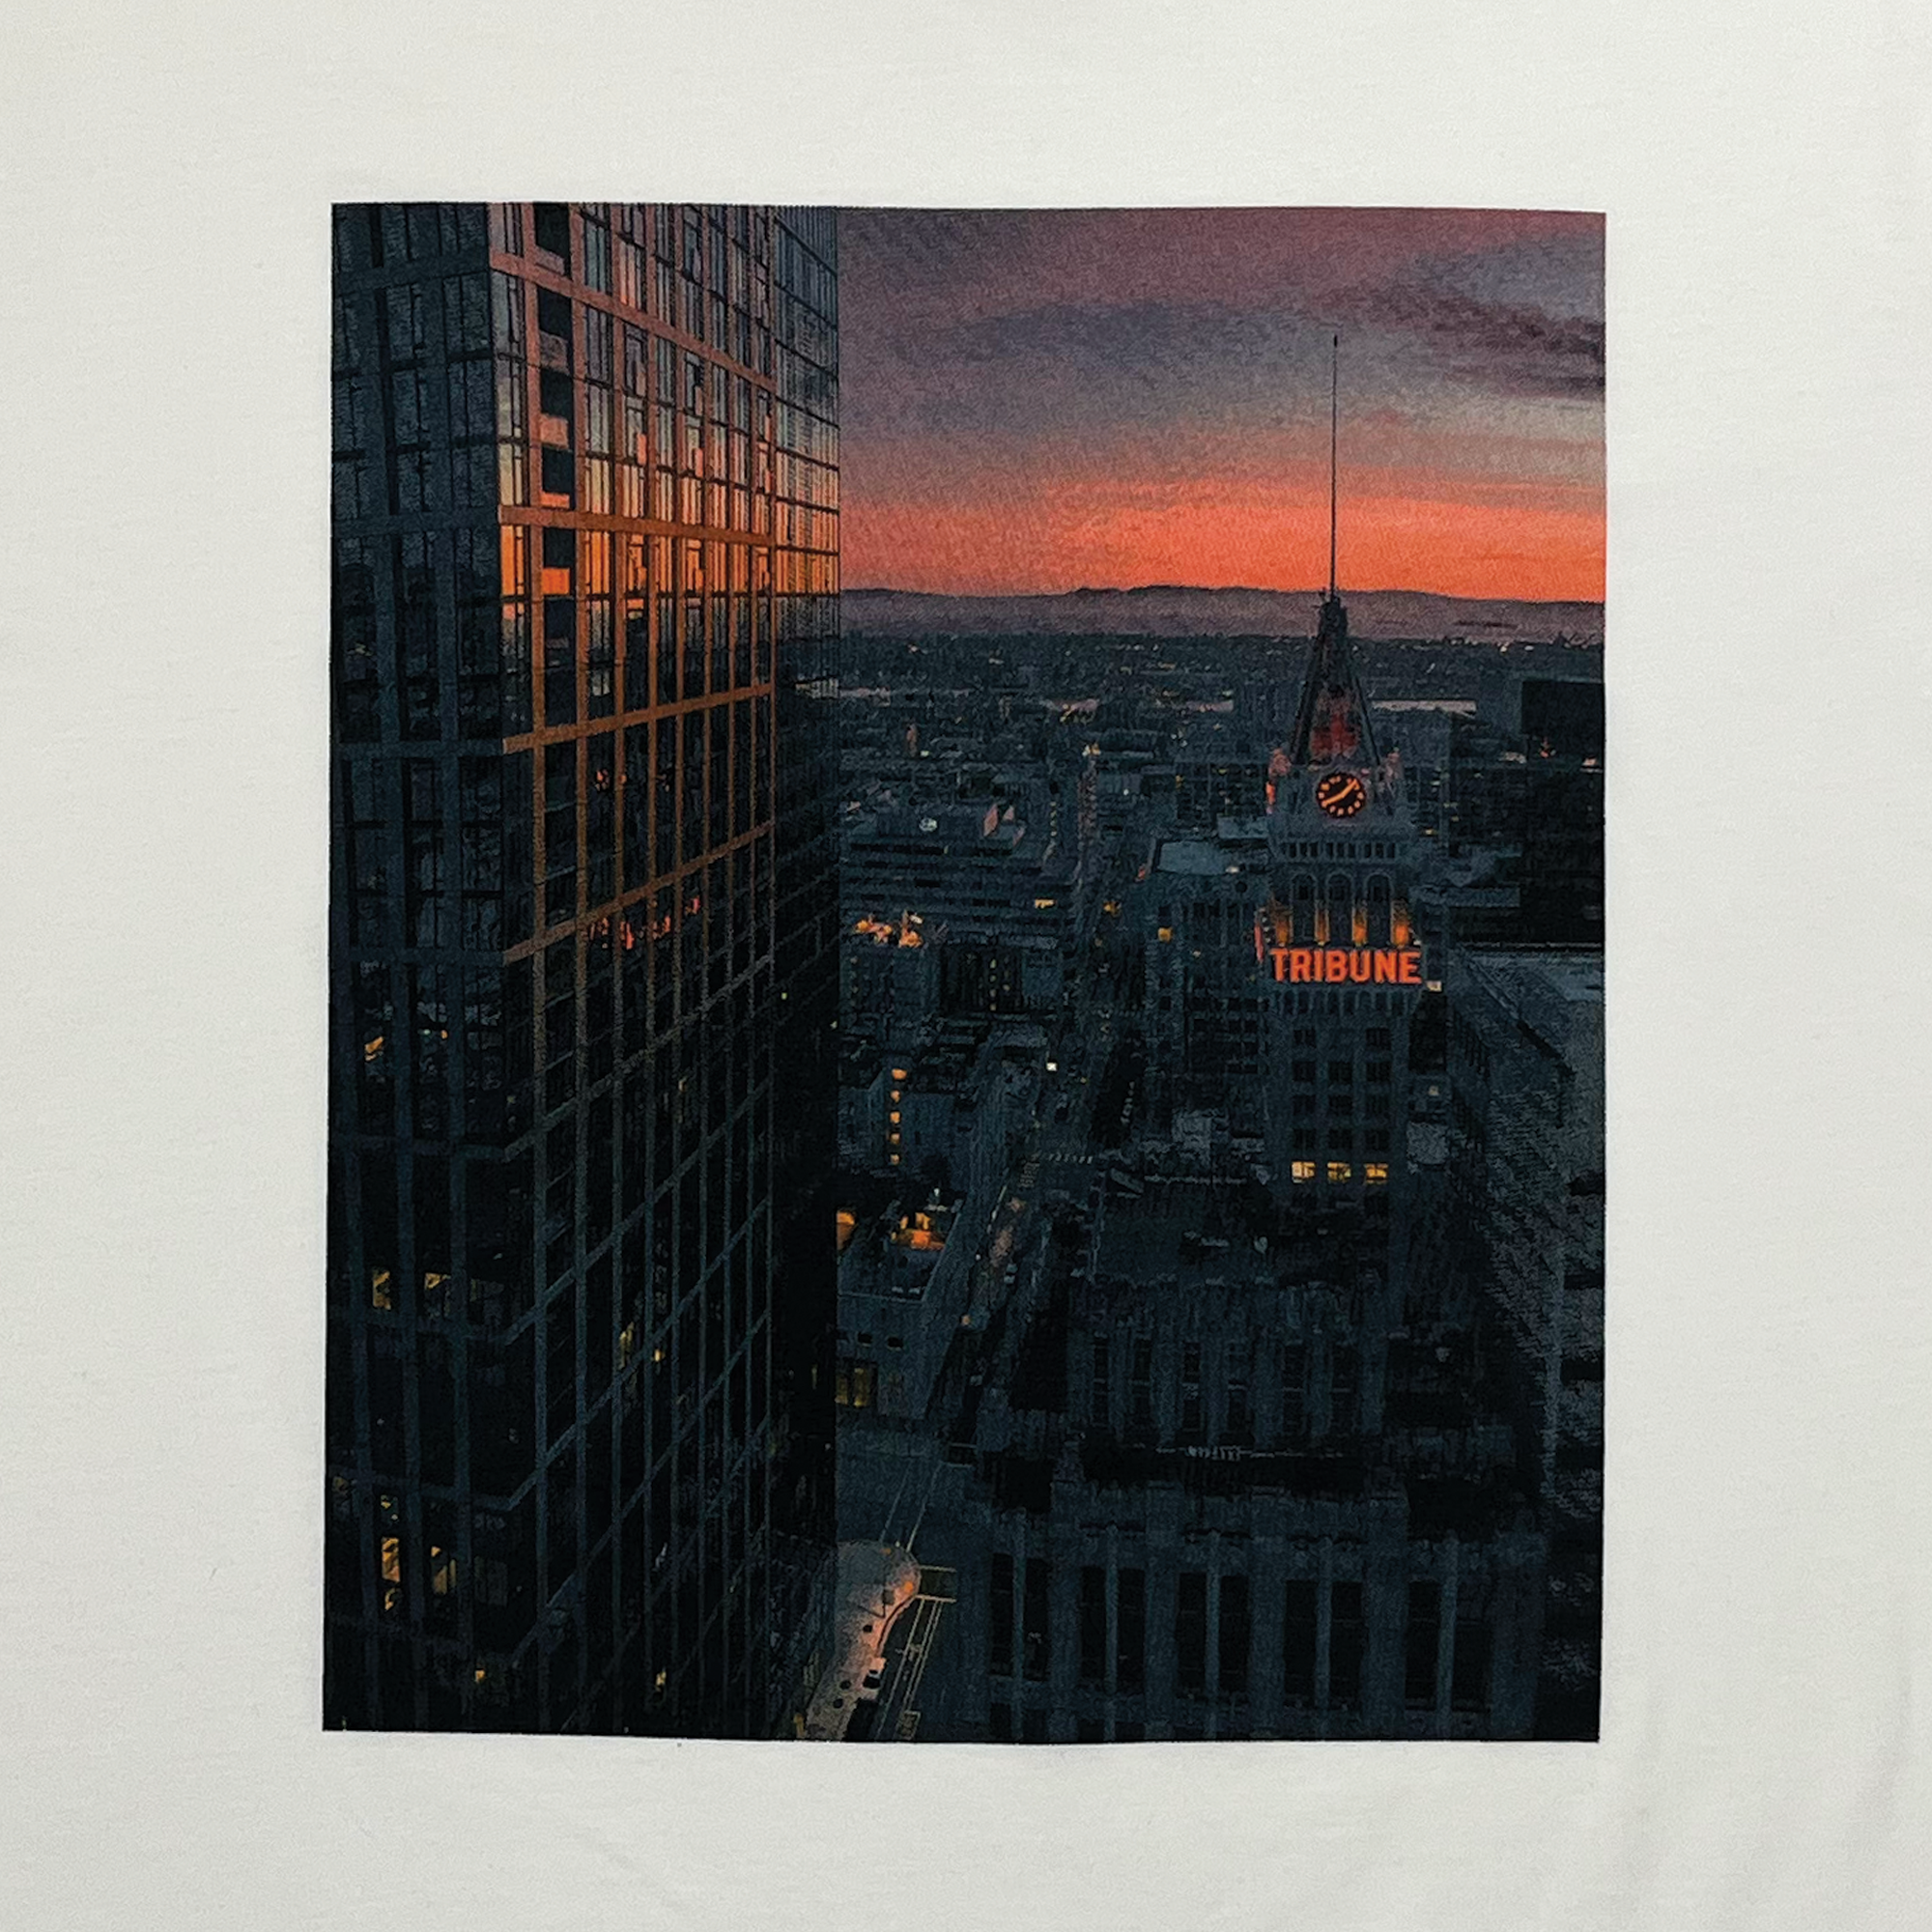 Close-up of Vincent James' photography image of the Oakland Tribune building and the Downtown Oakland landscape on a natural-cotton t-shirt.